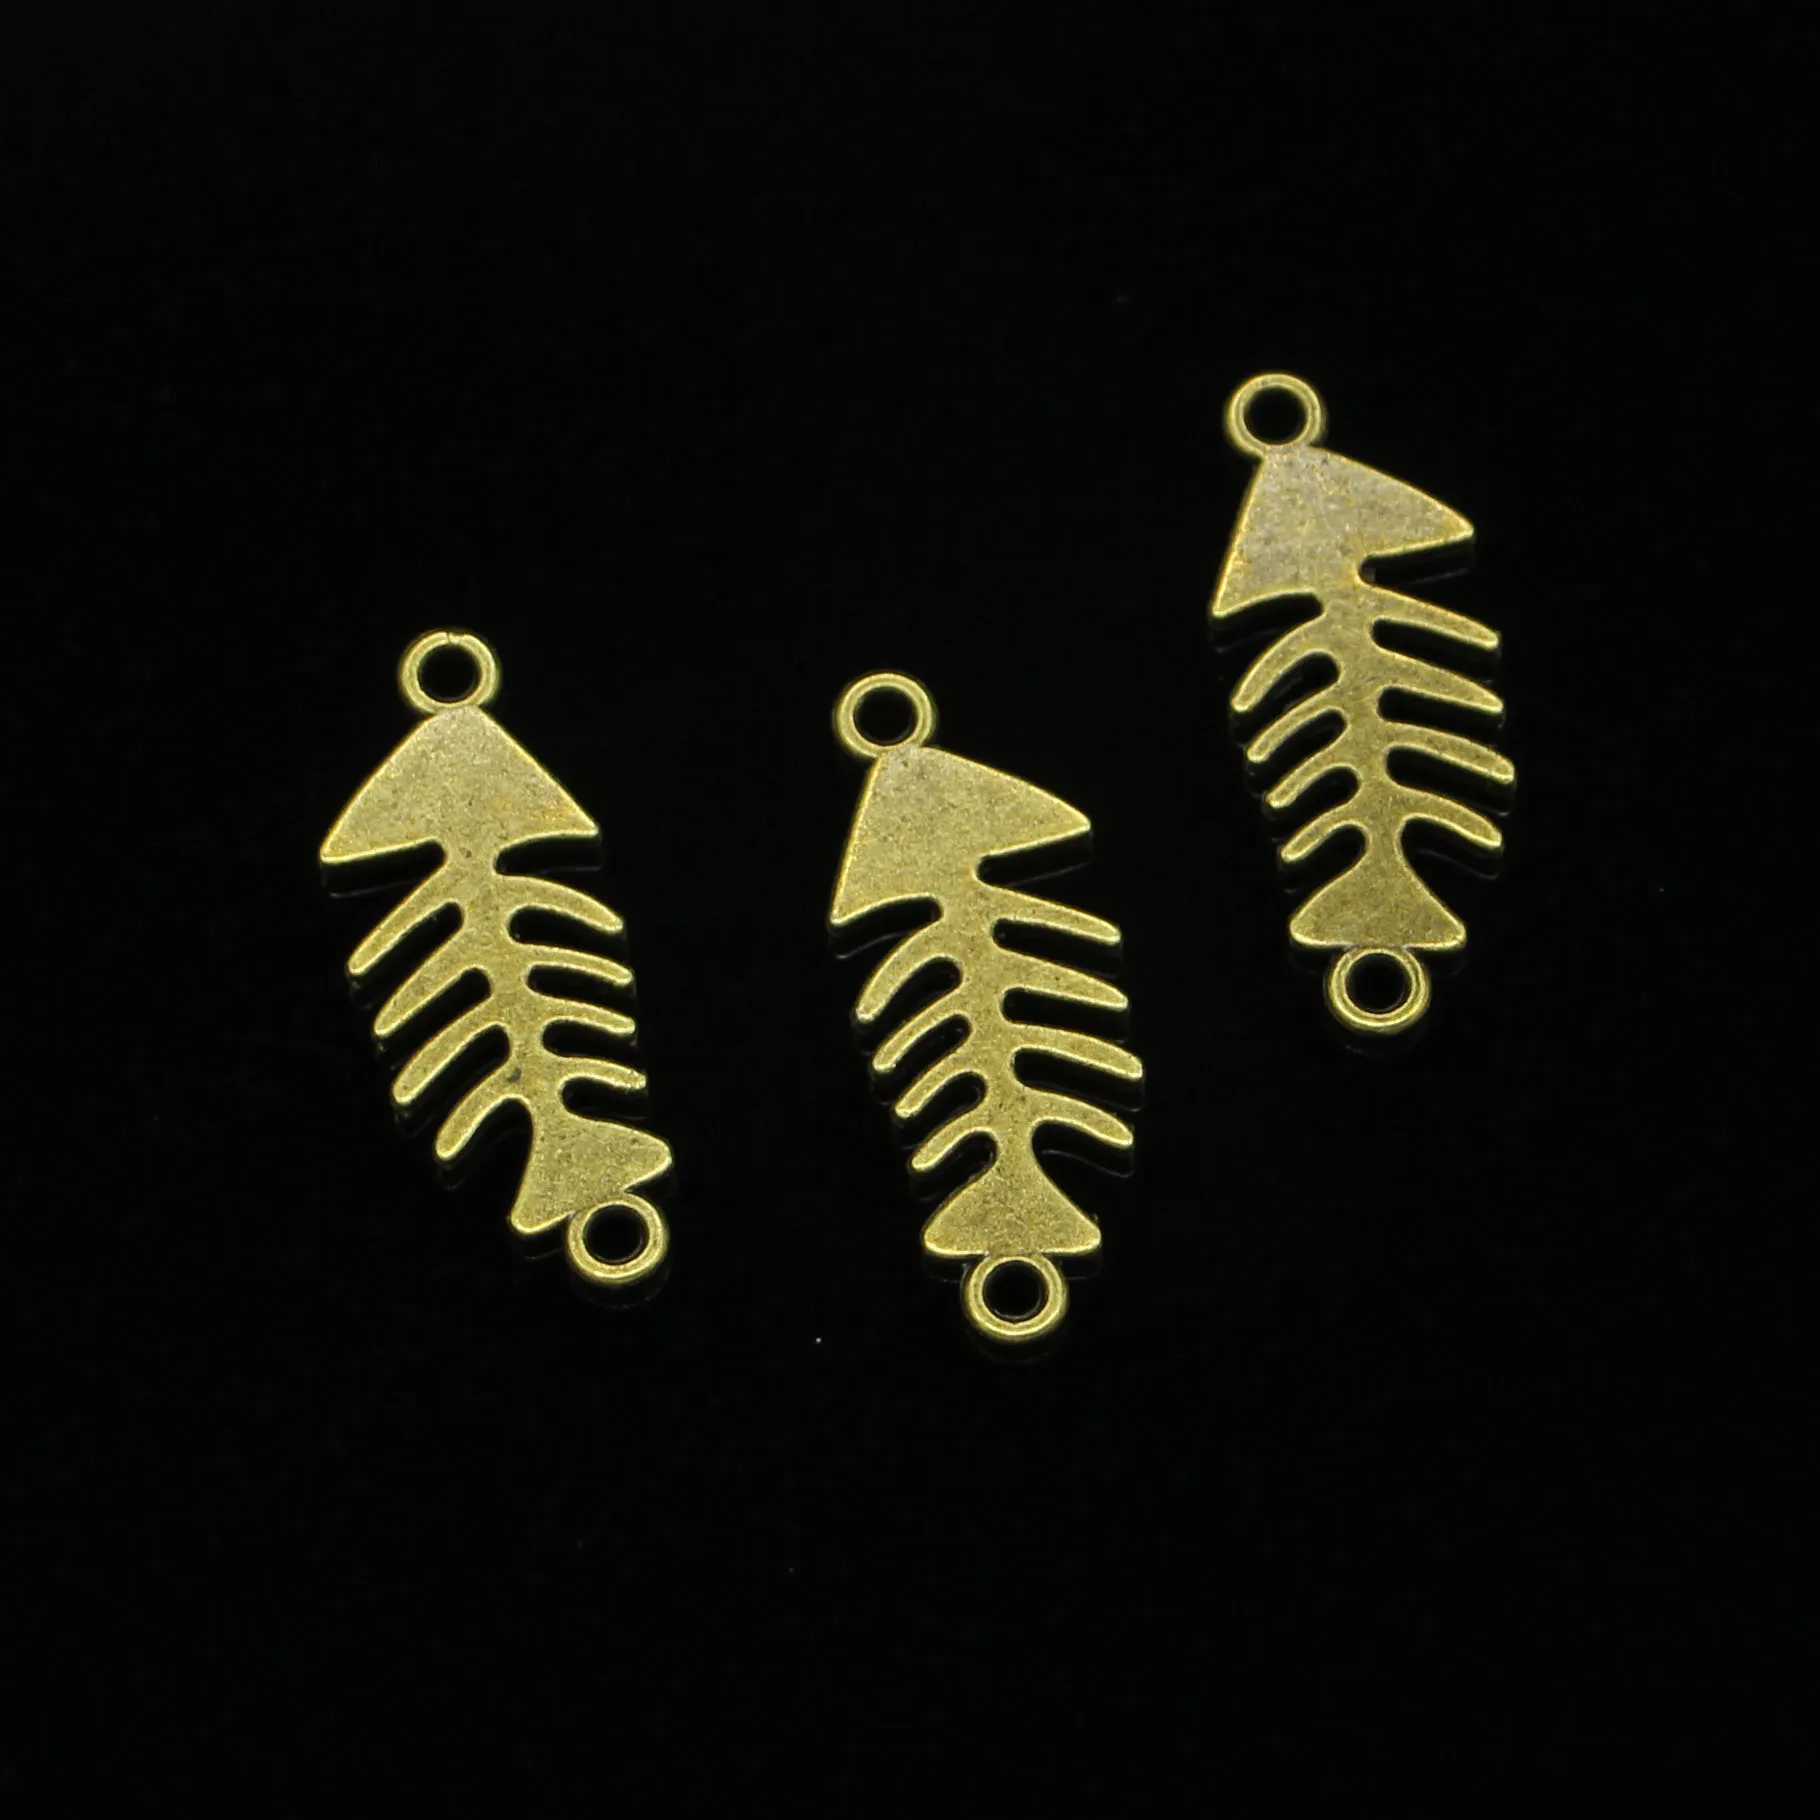 61pcs Zinc Alloy Charms Antique Bronze Plated fish bone connector Charms for Jewelry Making DIY Handmade Pendants 31*12mm